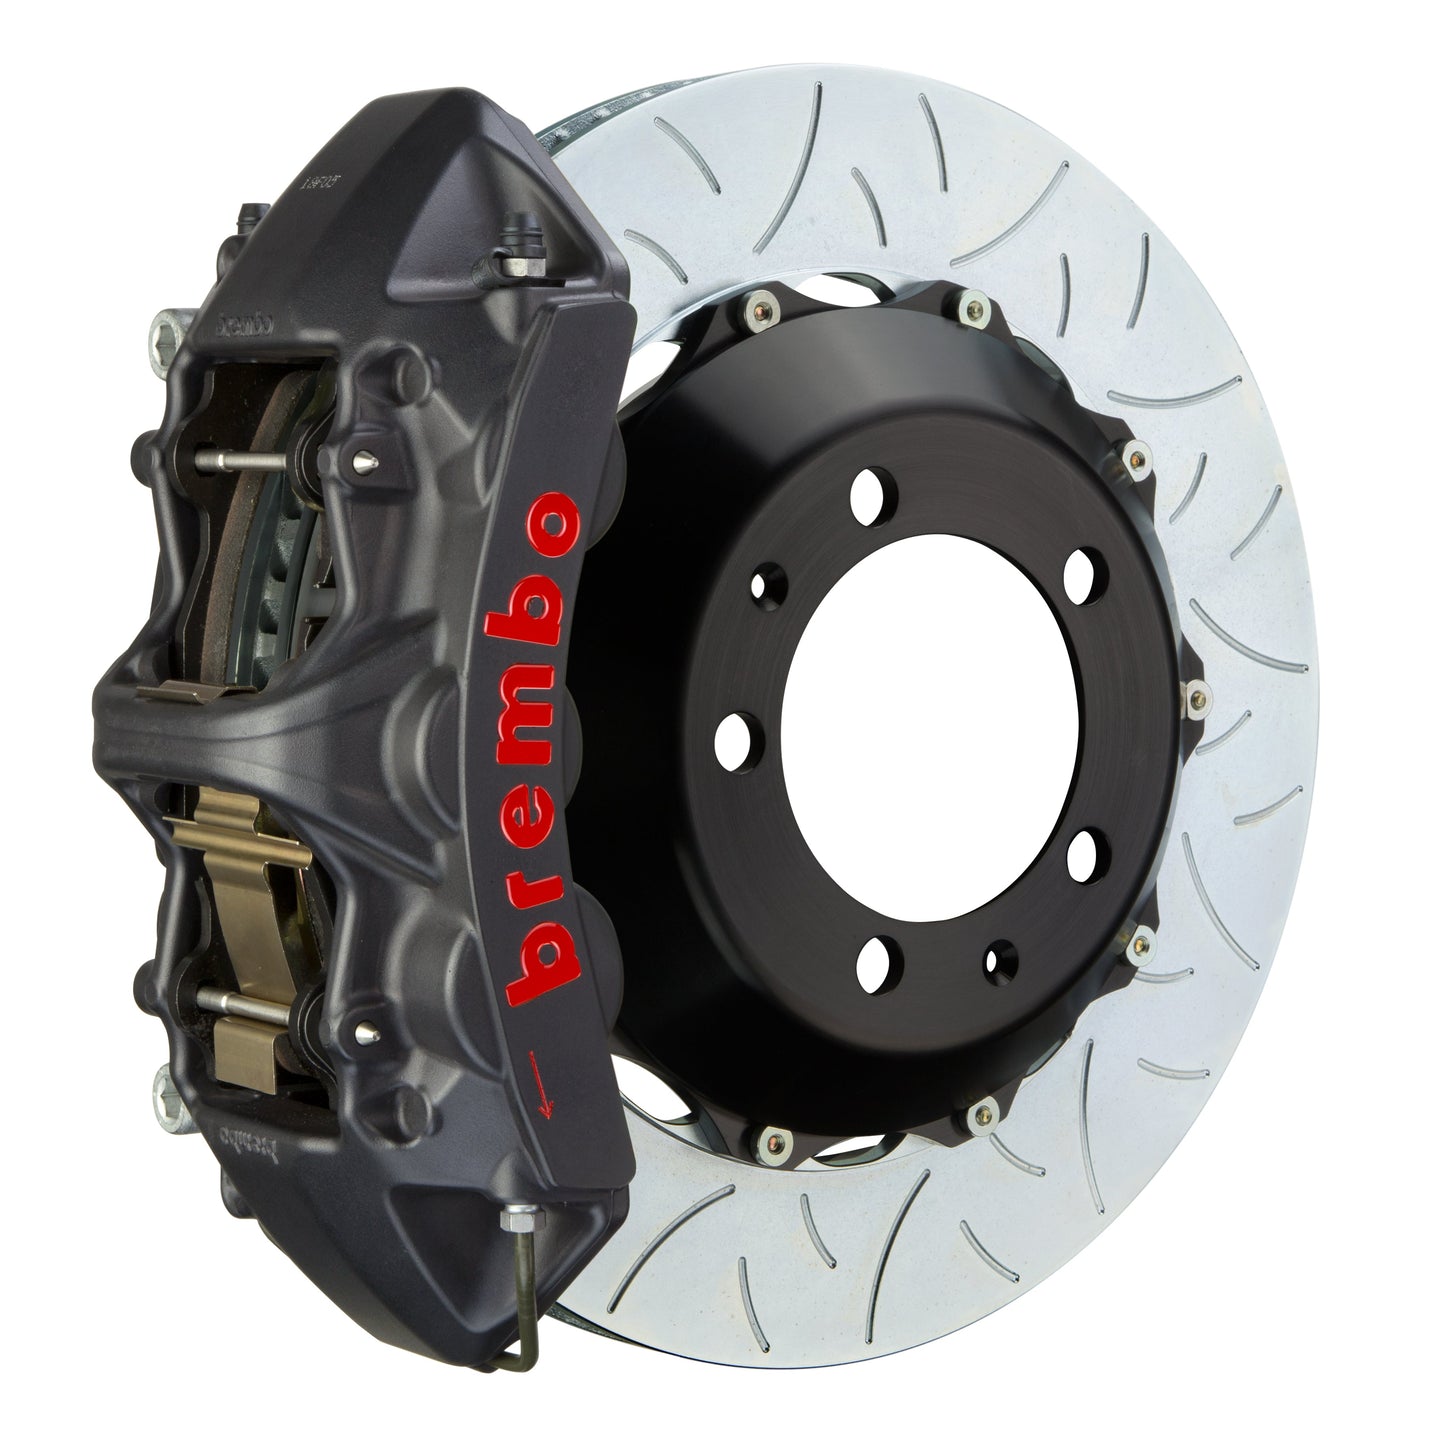 Front Brembo Gran Turismo Braking Upgrade Kit (1M19045AS) GT / S6 Caliper with 6-Pistons & 2-piece 380x32 Disc